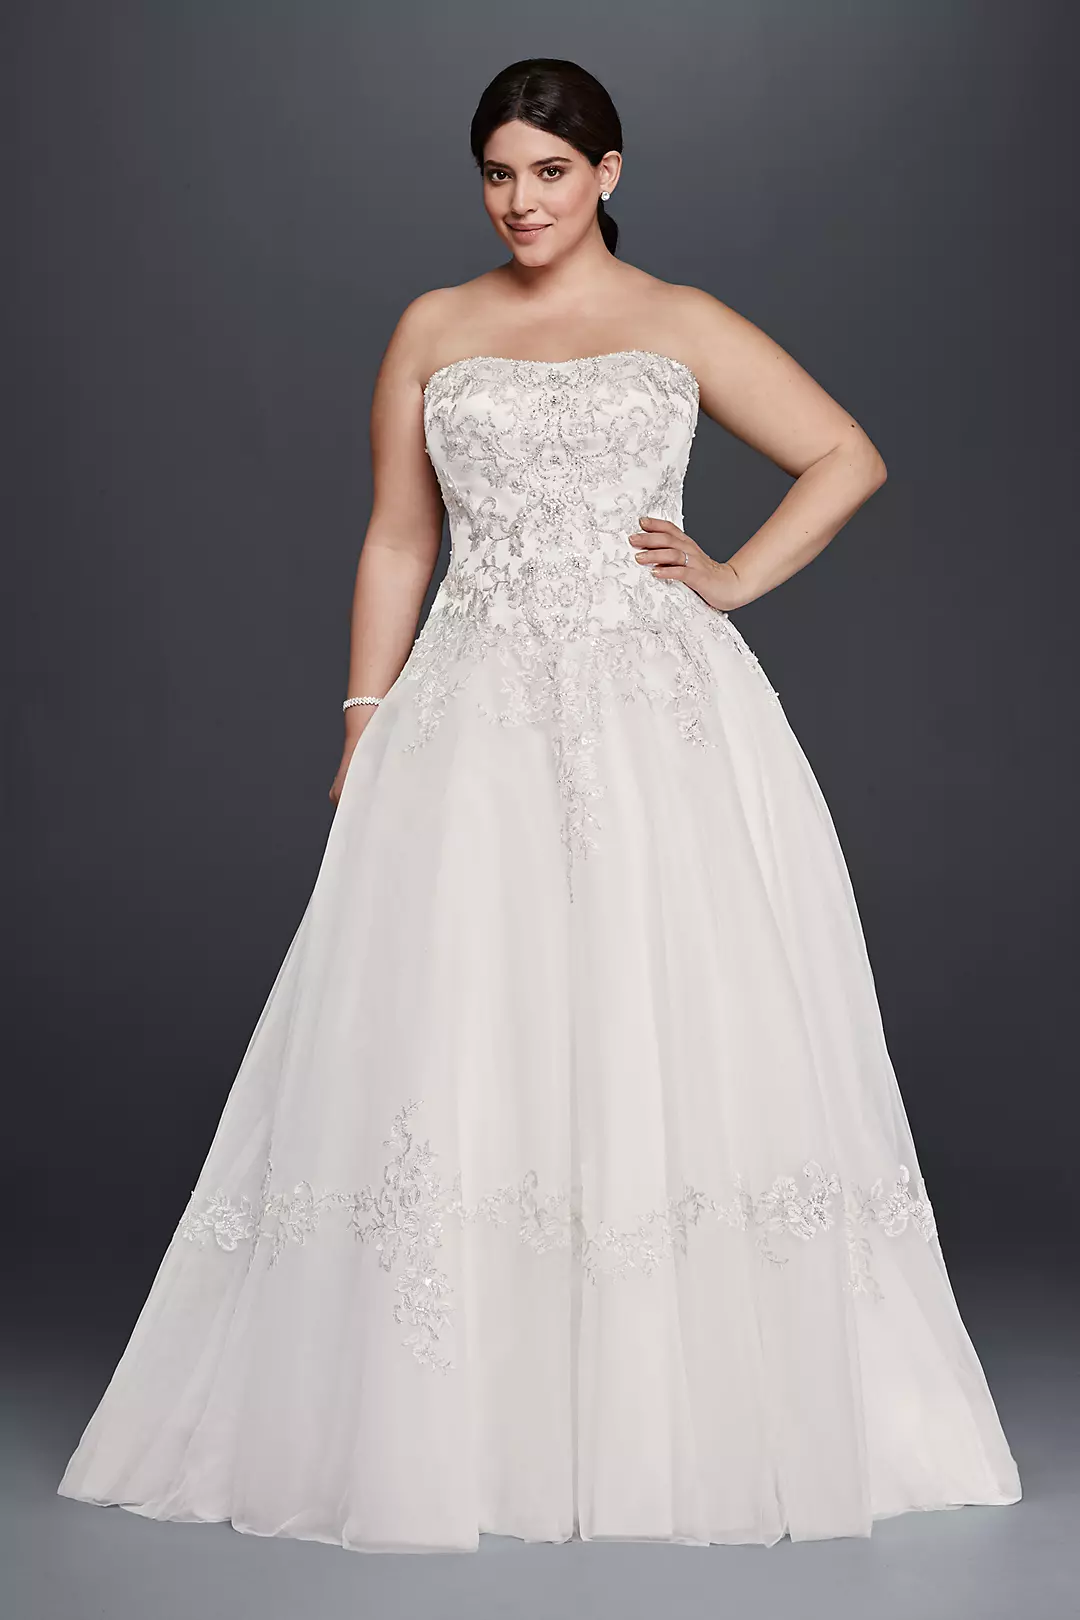 Tulle Plus Size Wedding Dress with Lace Appliques Image